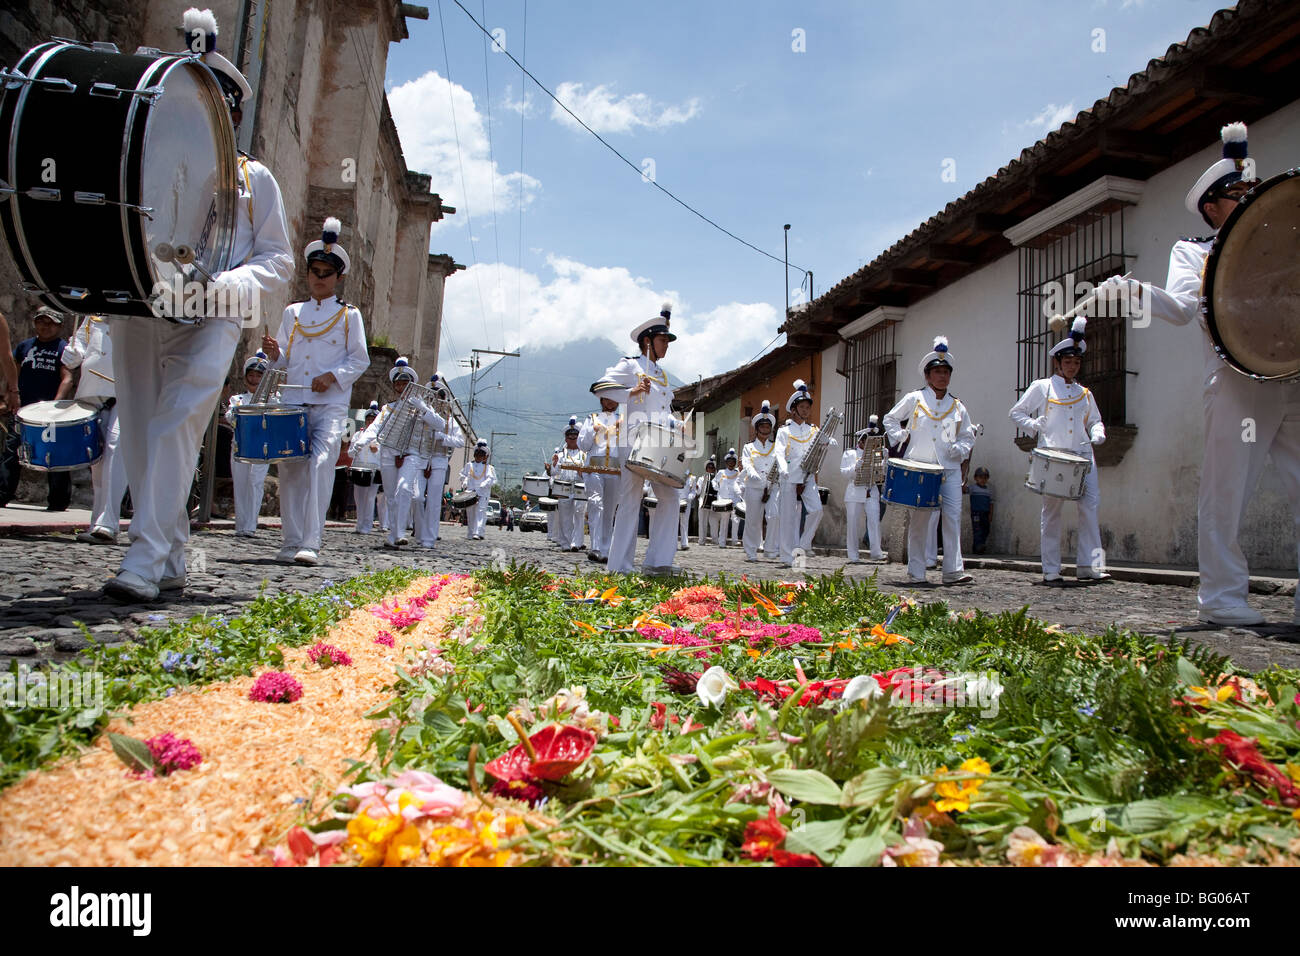 Independence Day Parade am 15. September in Antigua Guatemala. Stockfoto